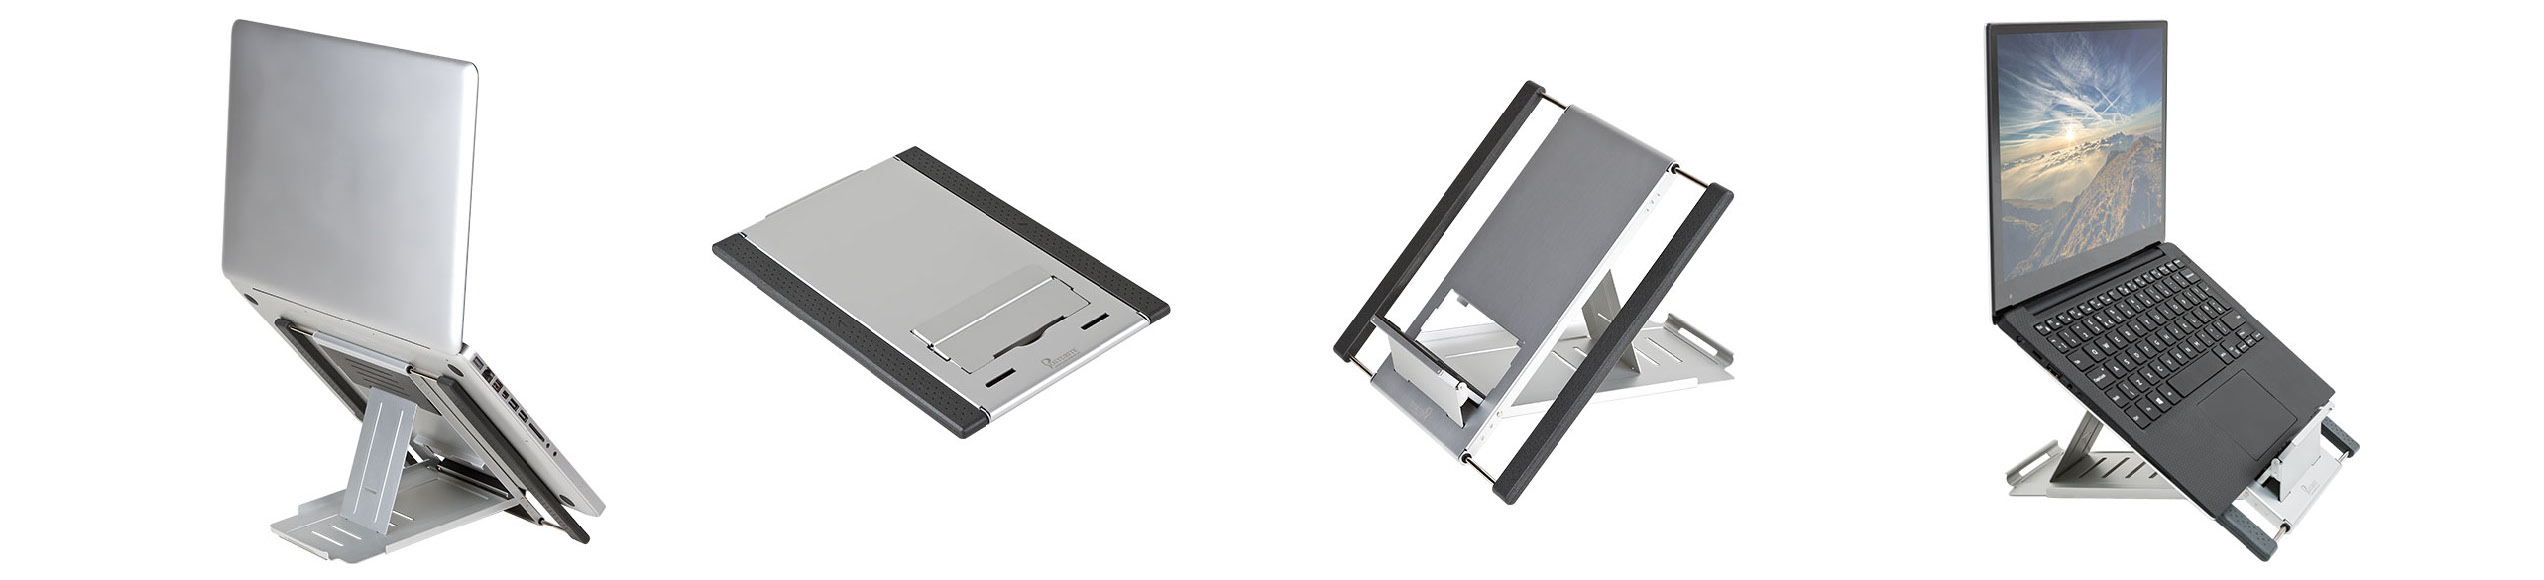 Image showing several different laptop stands from Postruite